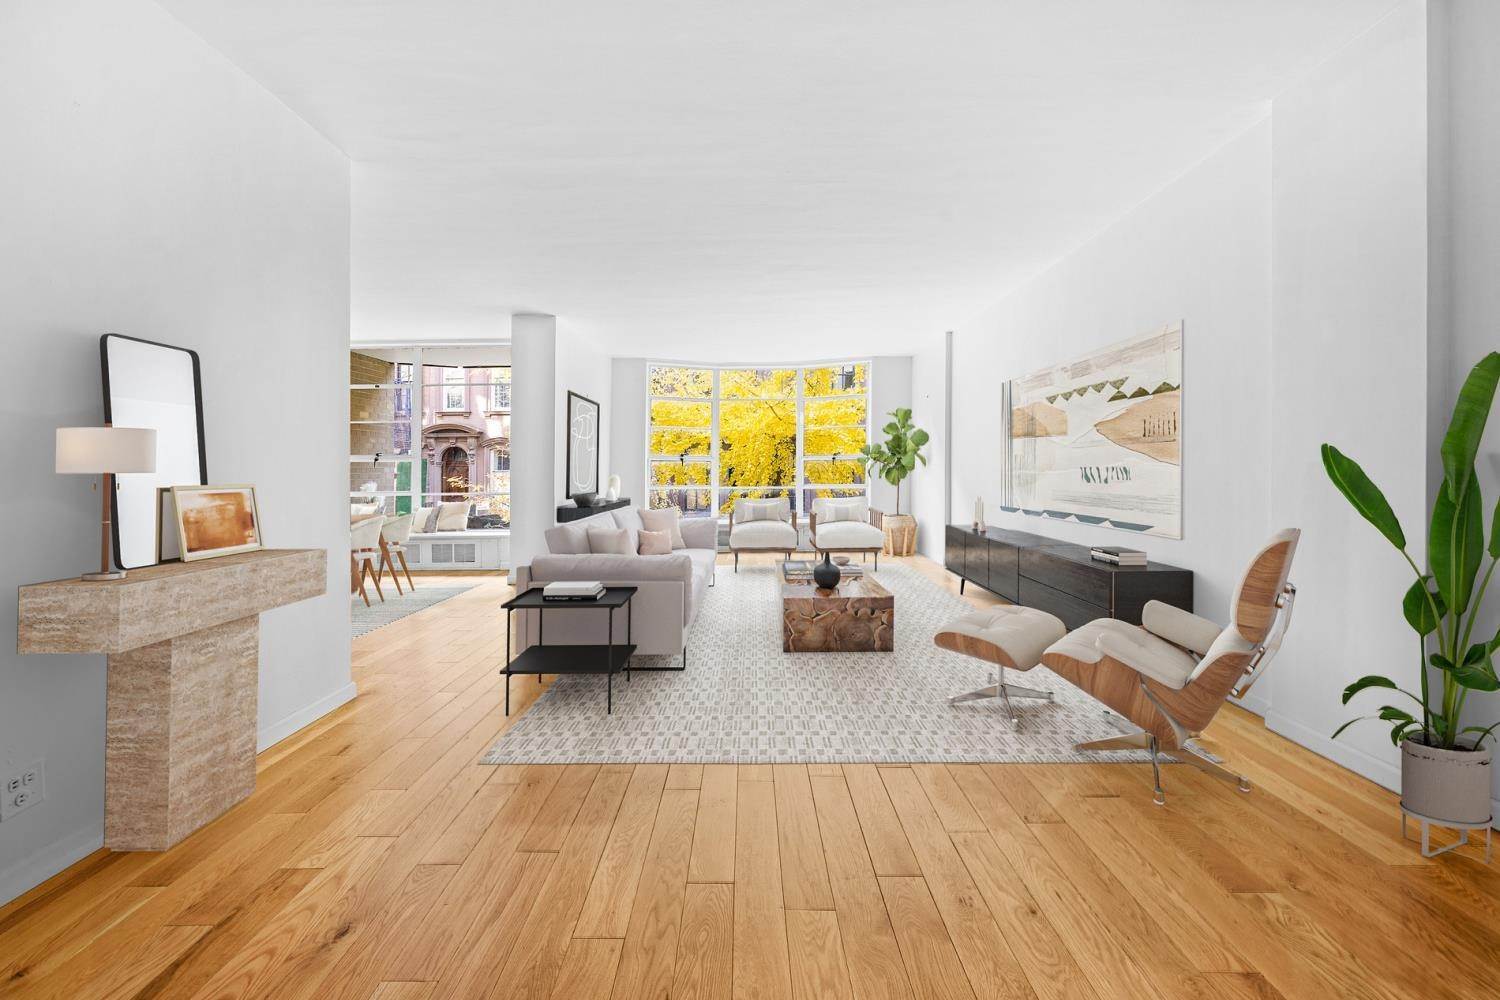 Cooperative for Sale at Greenwich Village, Manhattan, NY 10011